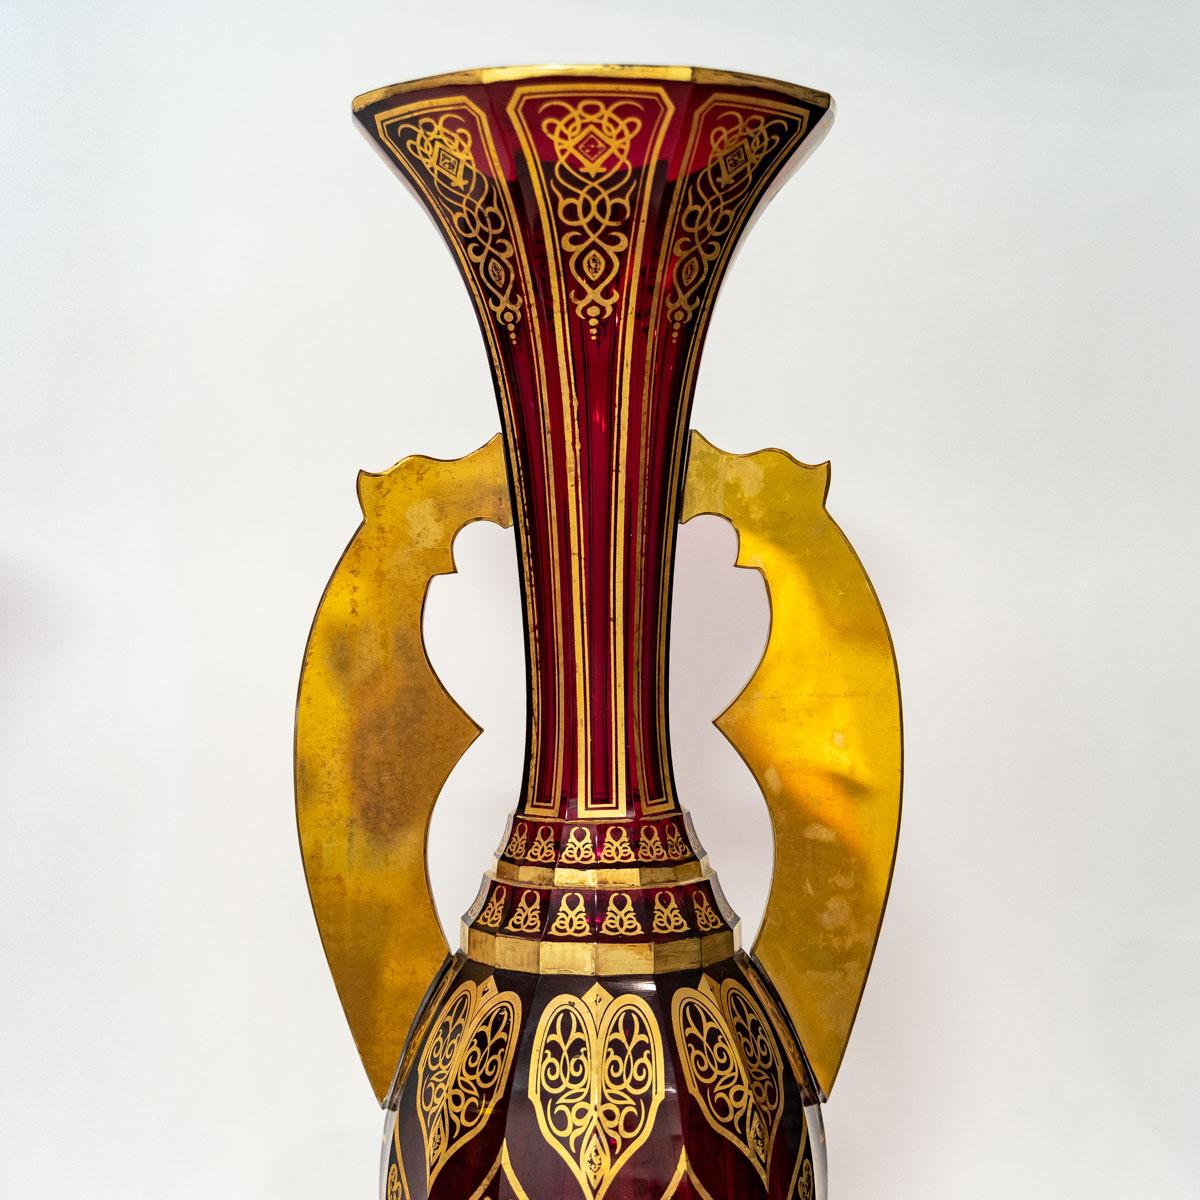 Pair of Bohemian cut crystal vases in ruby red and gold, 19th century
A very important pair of Bohemian crystal vases in ruby red and gold, unique for their design and size, presented at the Alhambra Palace.
Measures: H: 70 cm, W: 23.5 cm, D: 23